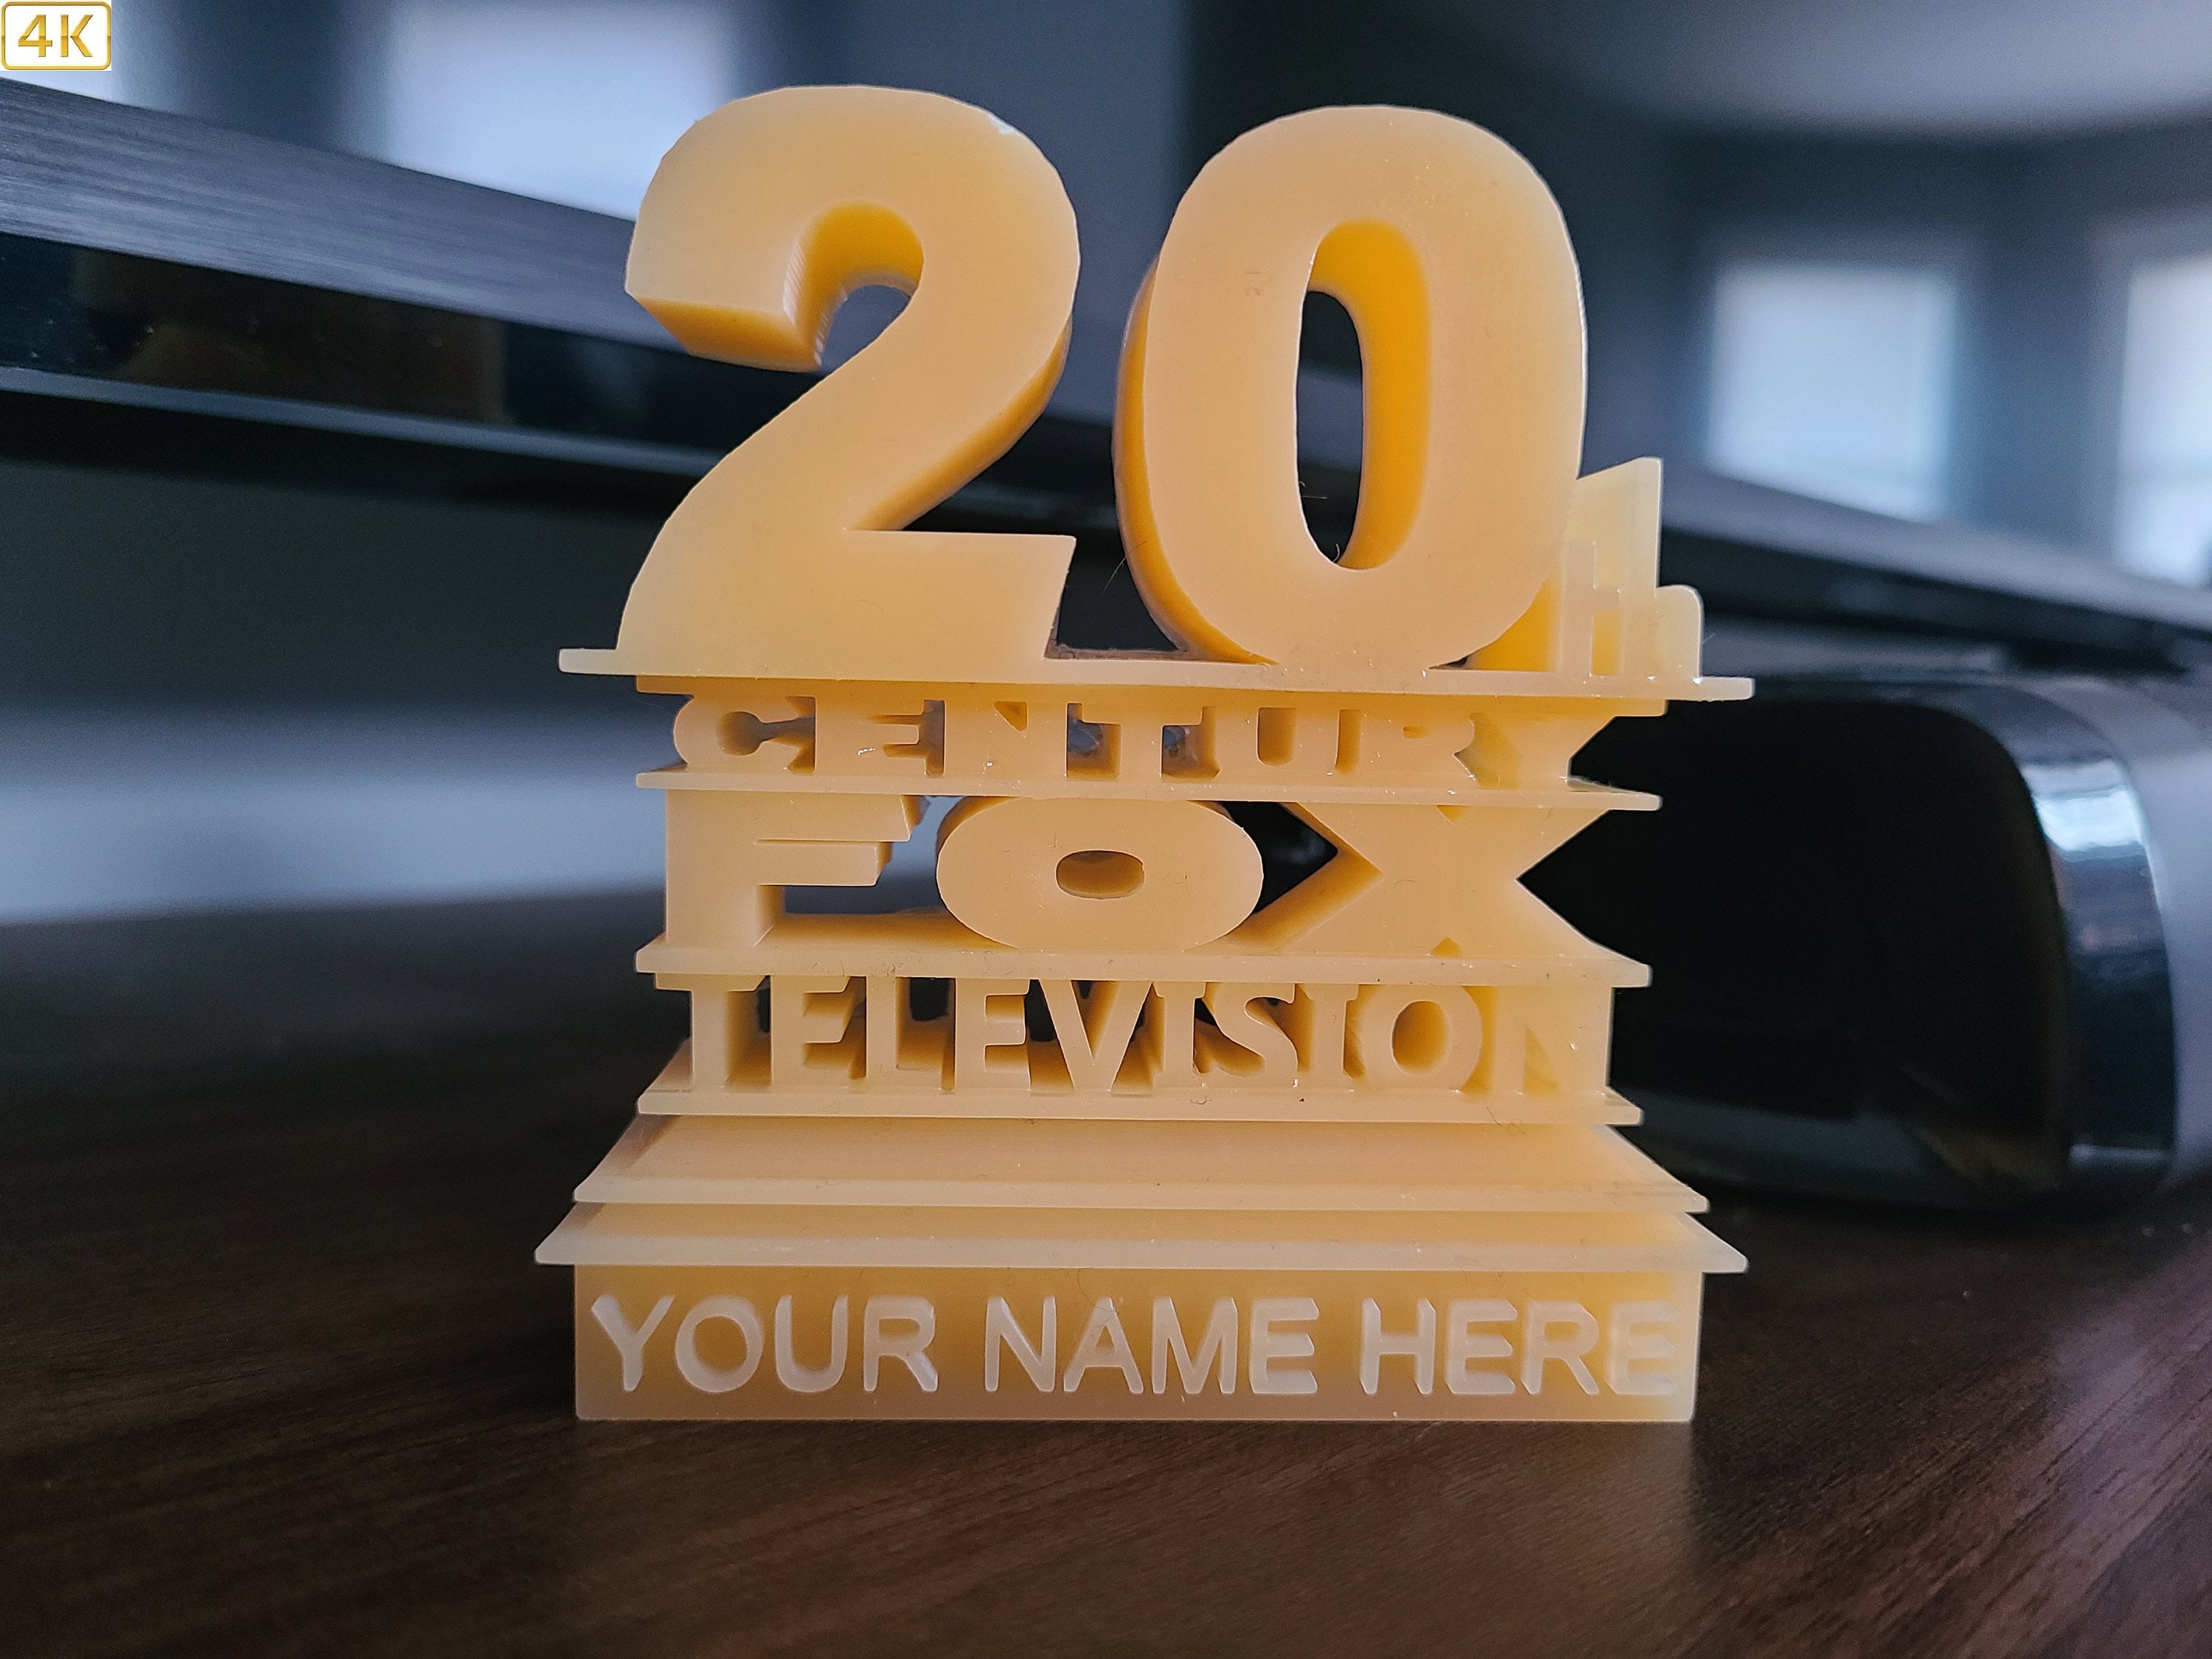 20th Century Fox Logos Puzzle, Movie Style Sign, 3D Printed Custom Gift